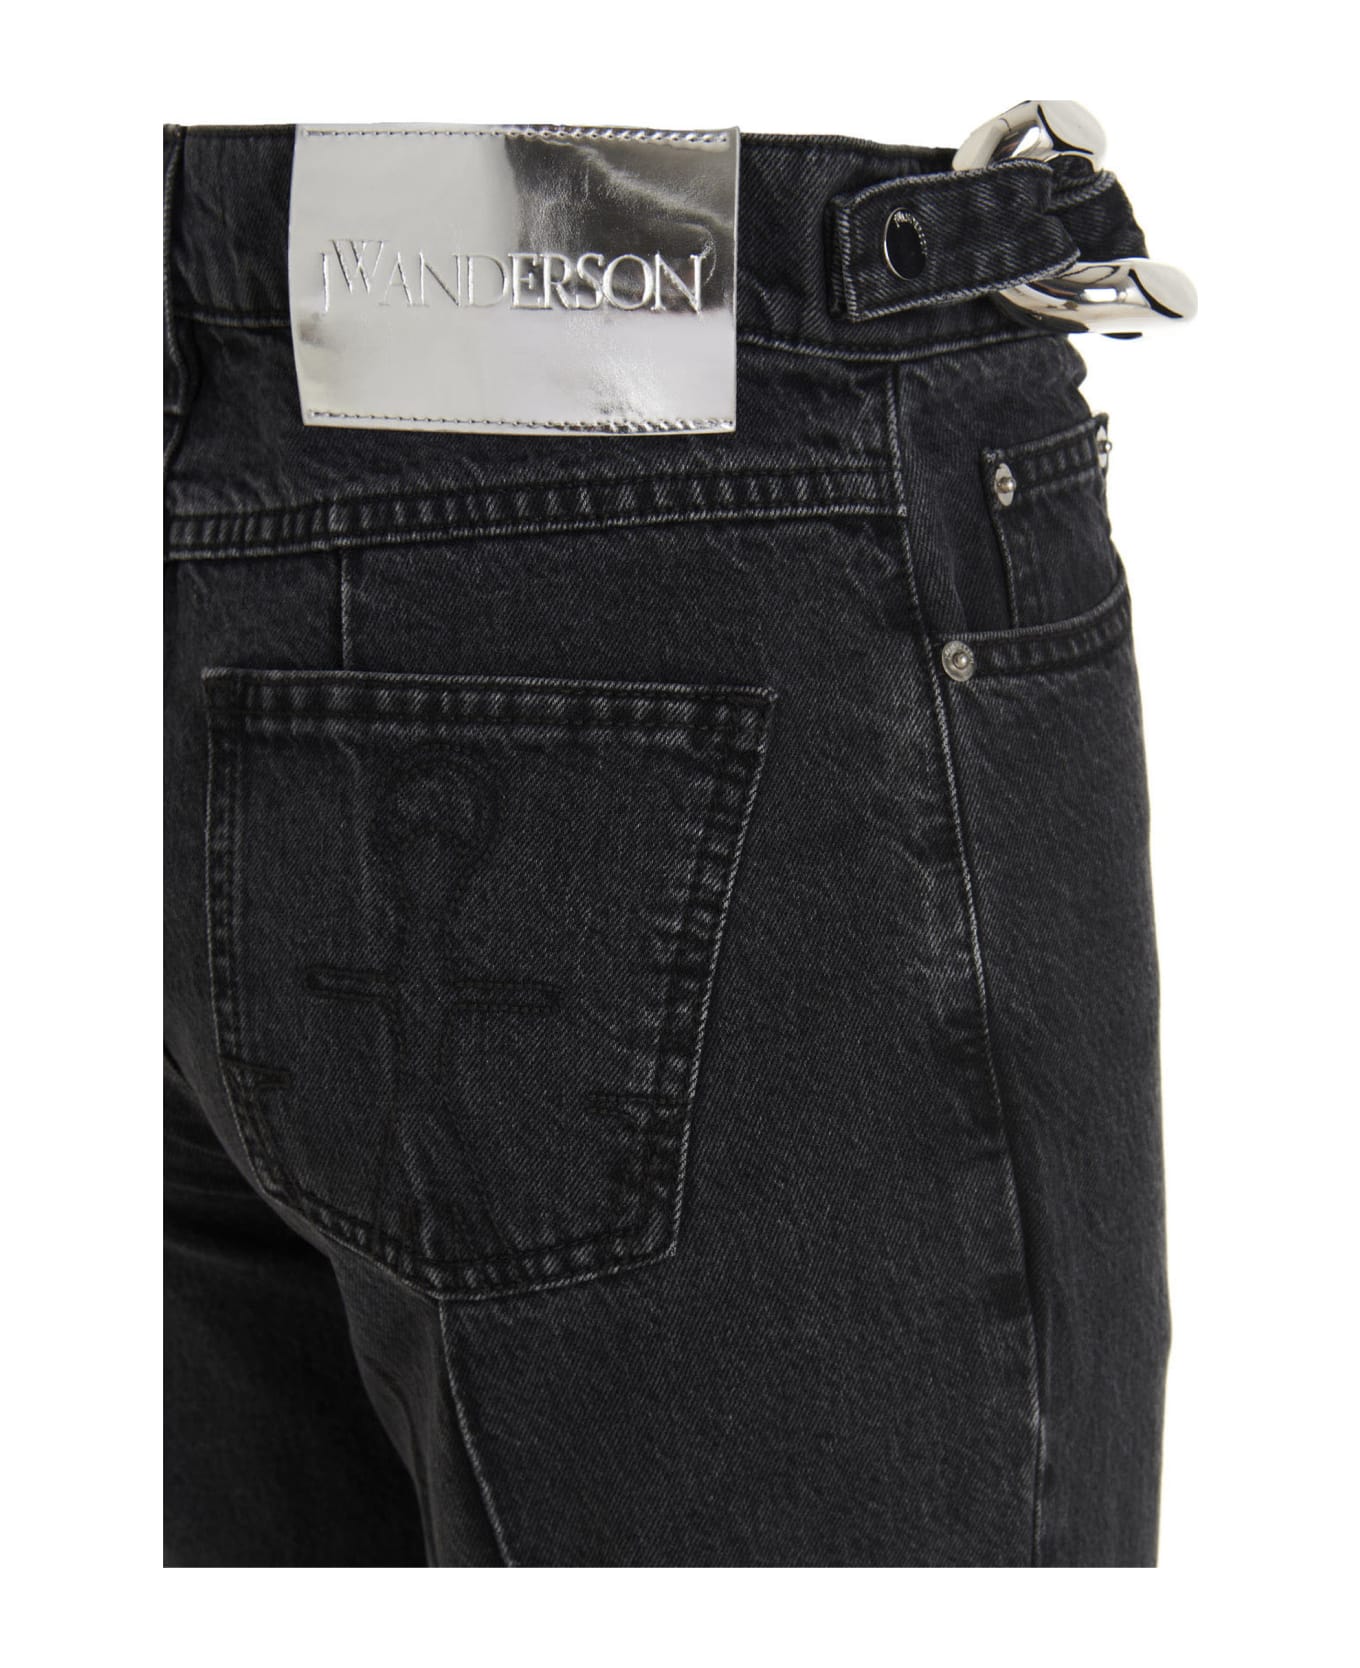 J.W. Anderson 'chain Link' Jeans - BLACK デニム